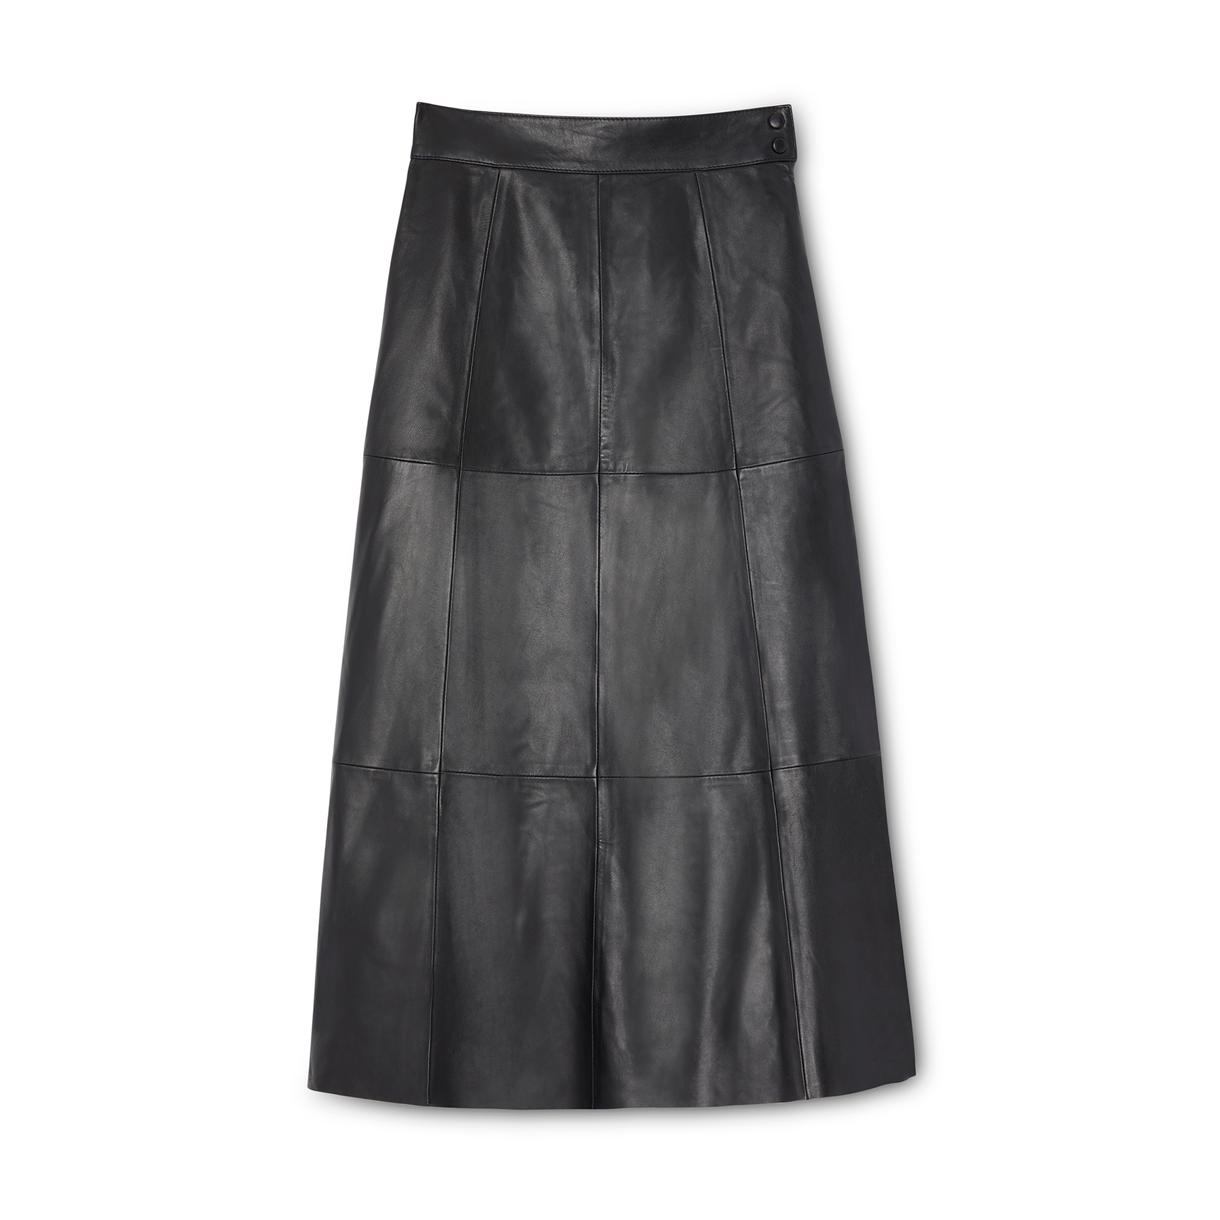 G. Label by goop Marilyn Midlength Leather Skirt